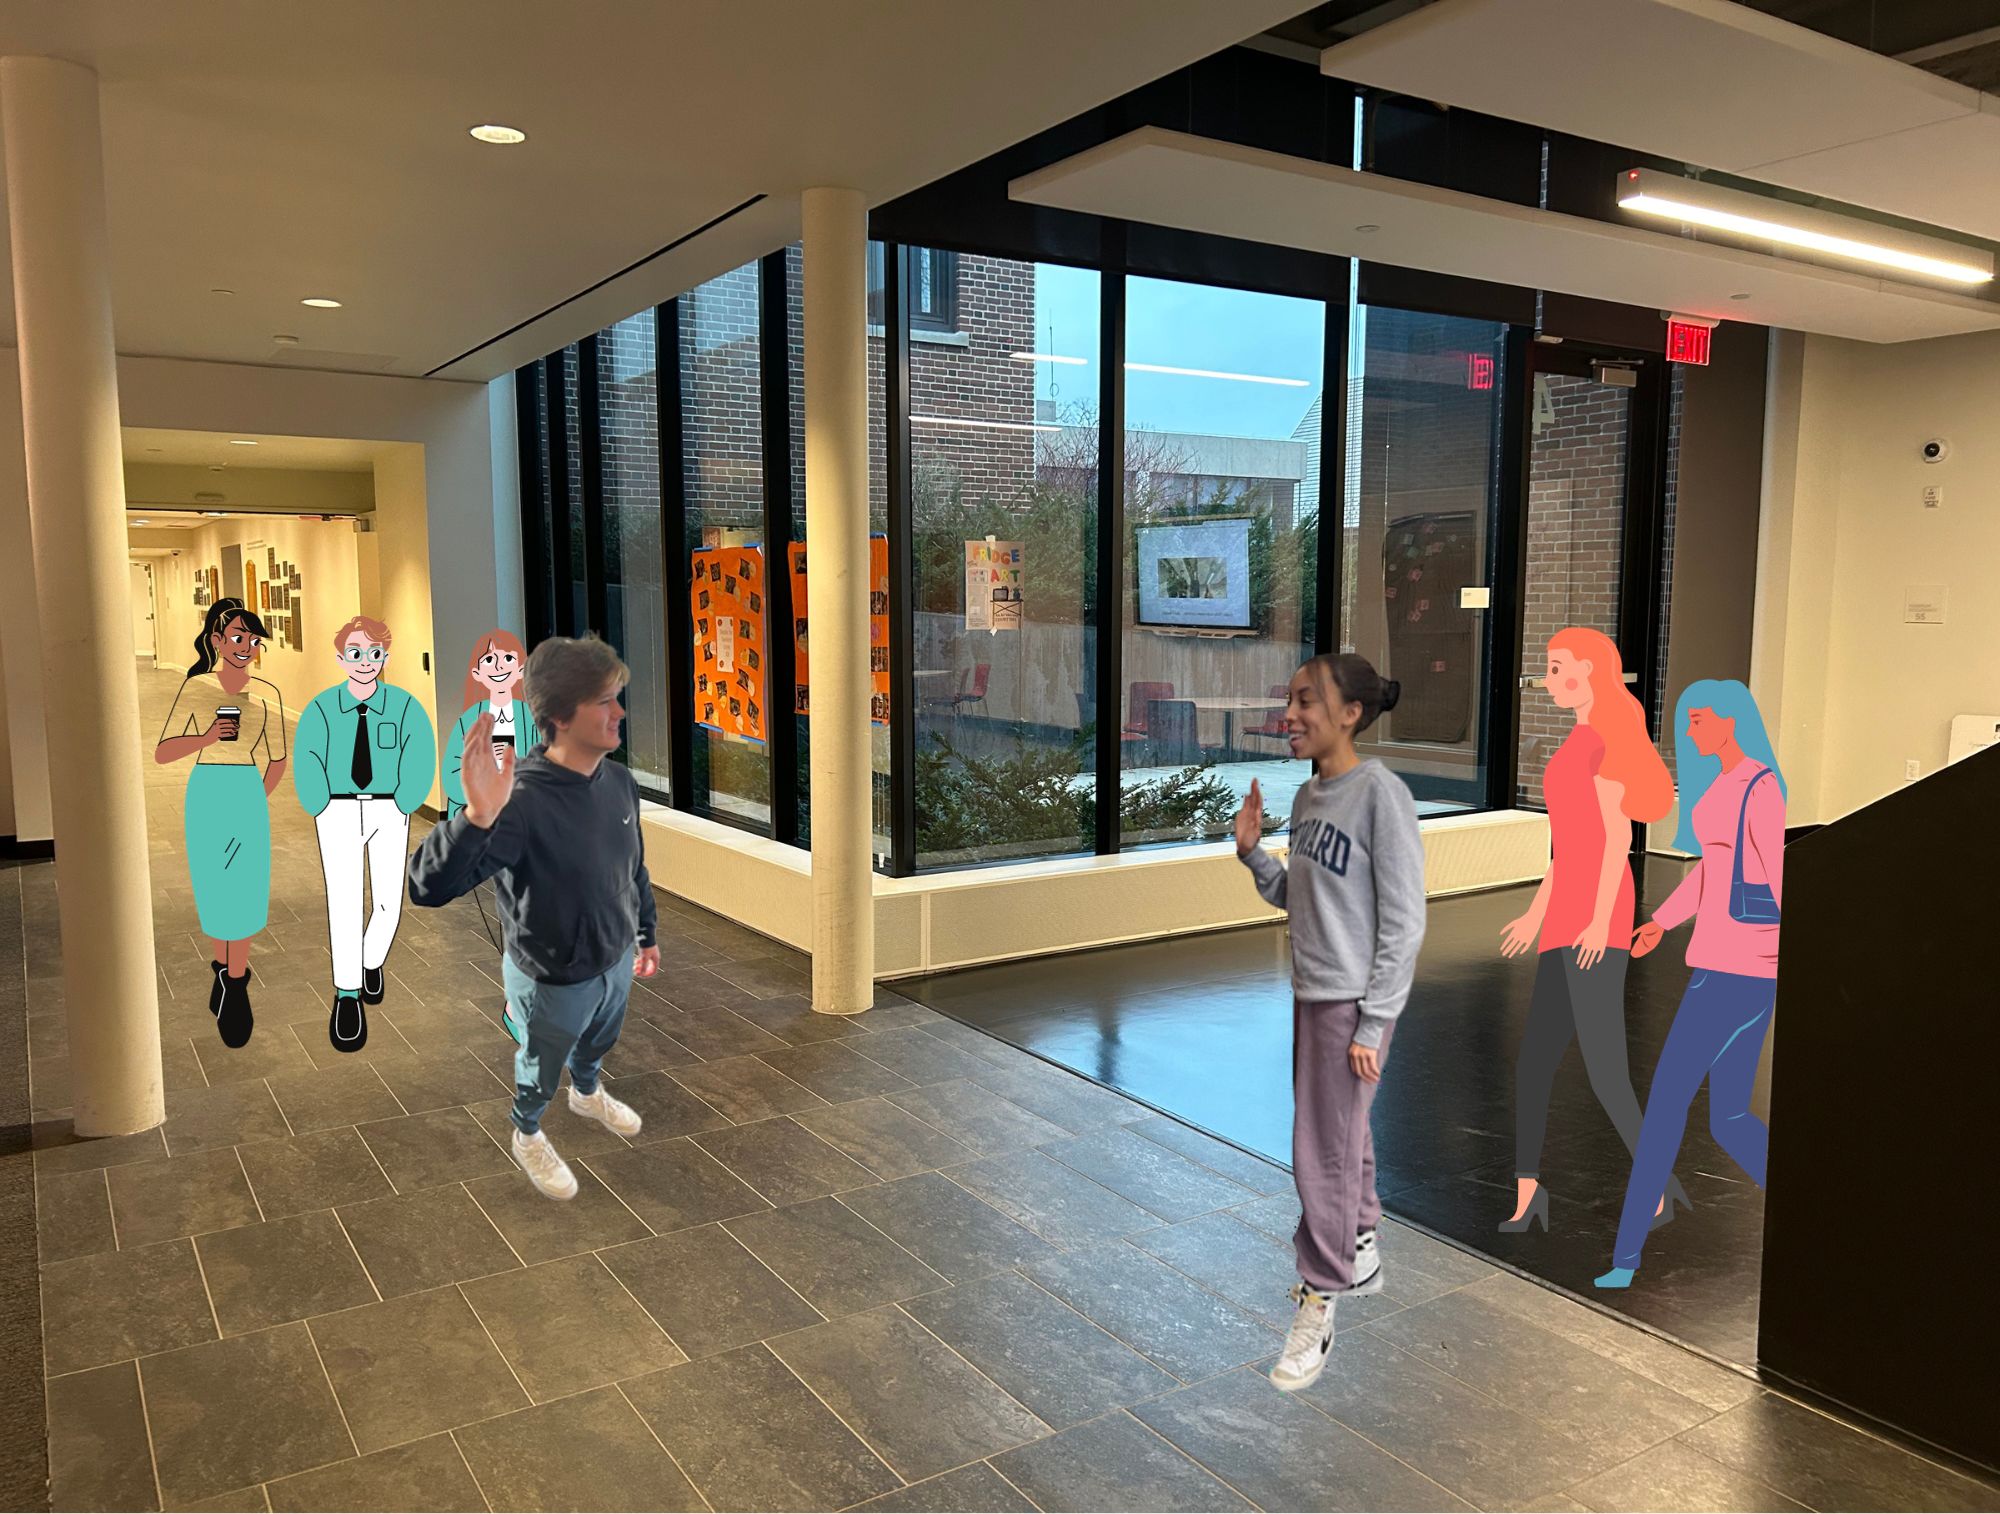 GRACIOUS GREETINGS. Senior Sam Murphy waves at junior Julia Taylor from across the hallway. Part of their job as a tour guide requires them to put on a professional front, welcoming all prospective families into the building to show them around. (Cutout images by McKinley Garner, graphic by Zimo Xie)